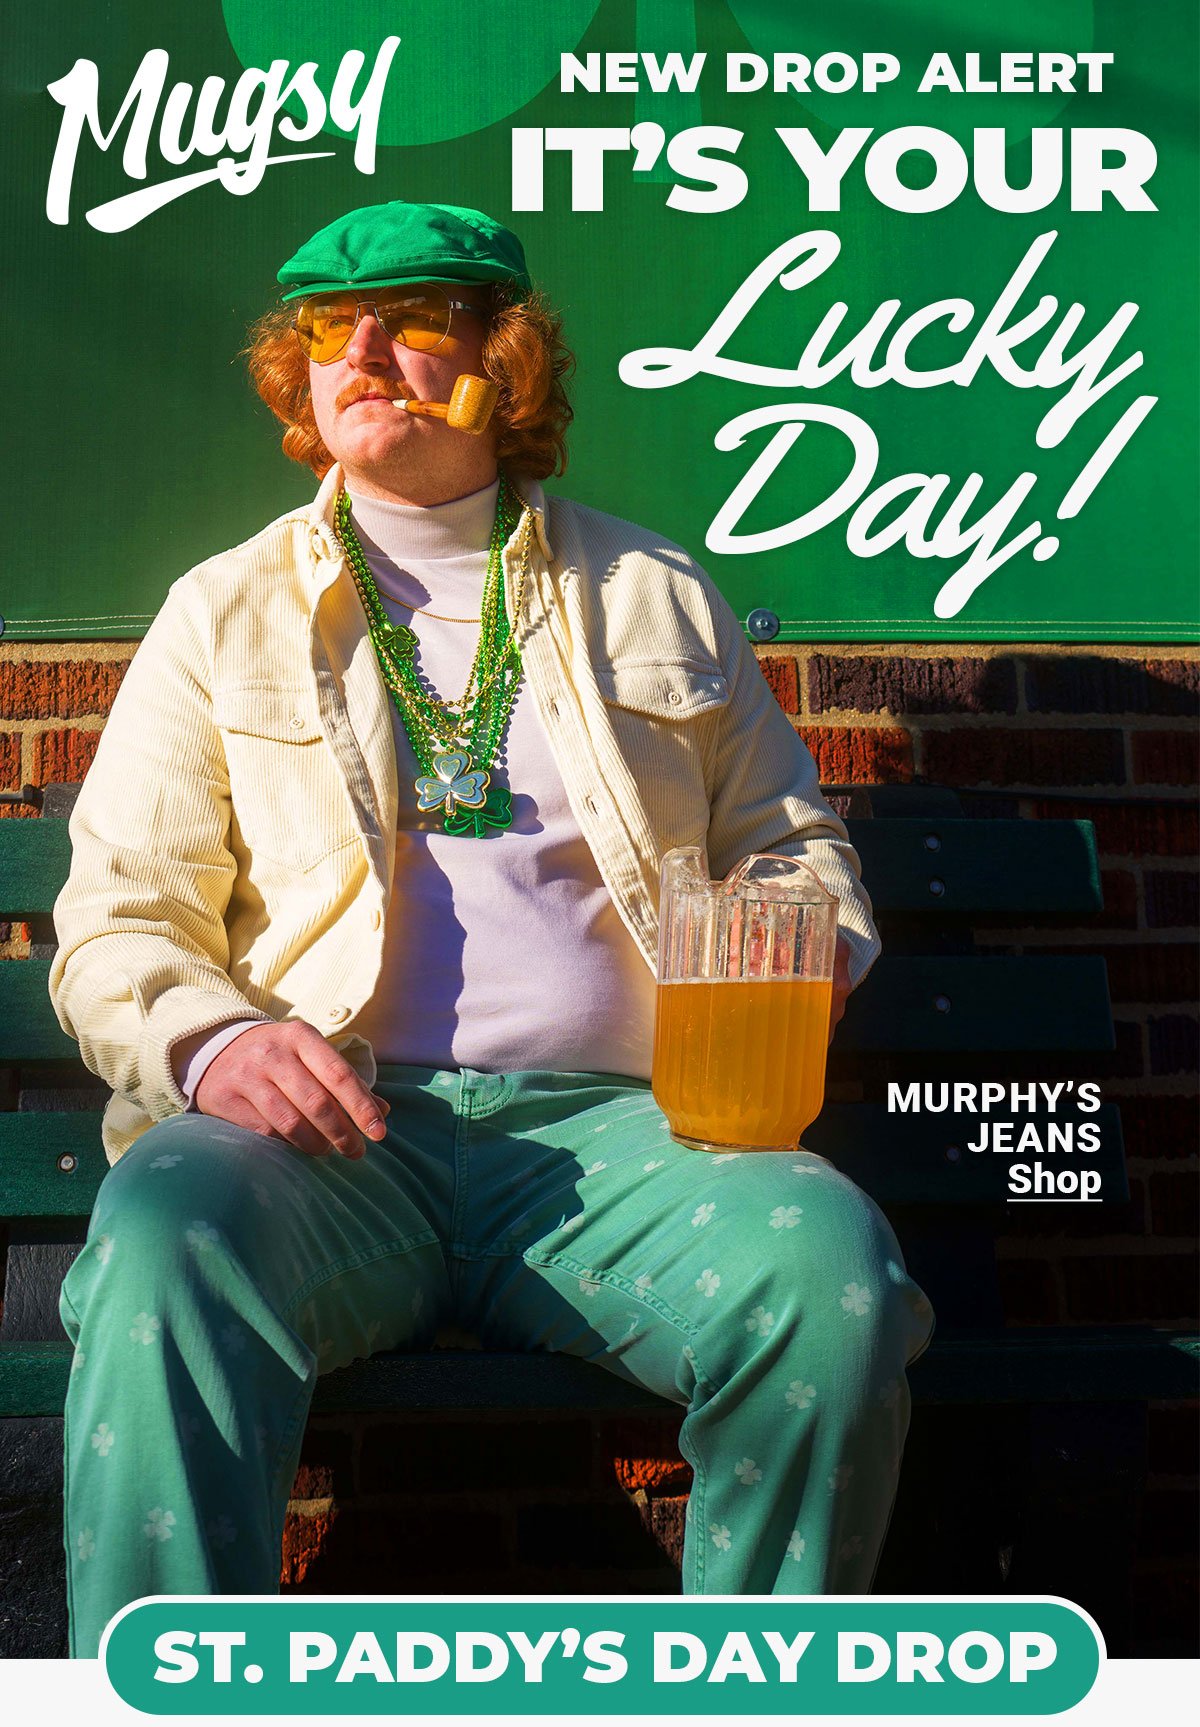 Mugsy. New drop alert. It's your Lucky Day! Murphy's jeans - shop now. Button: St. Paddy's Day Drop.